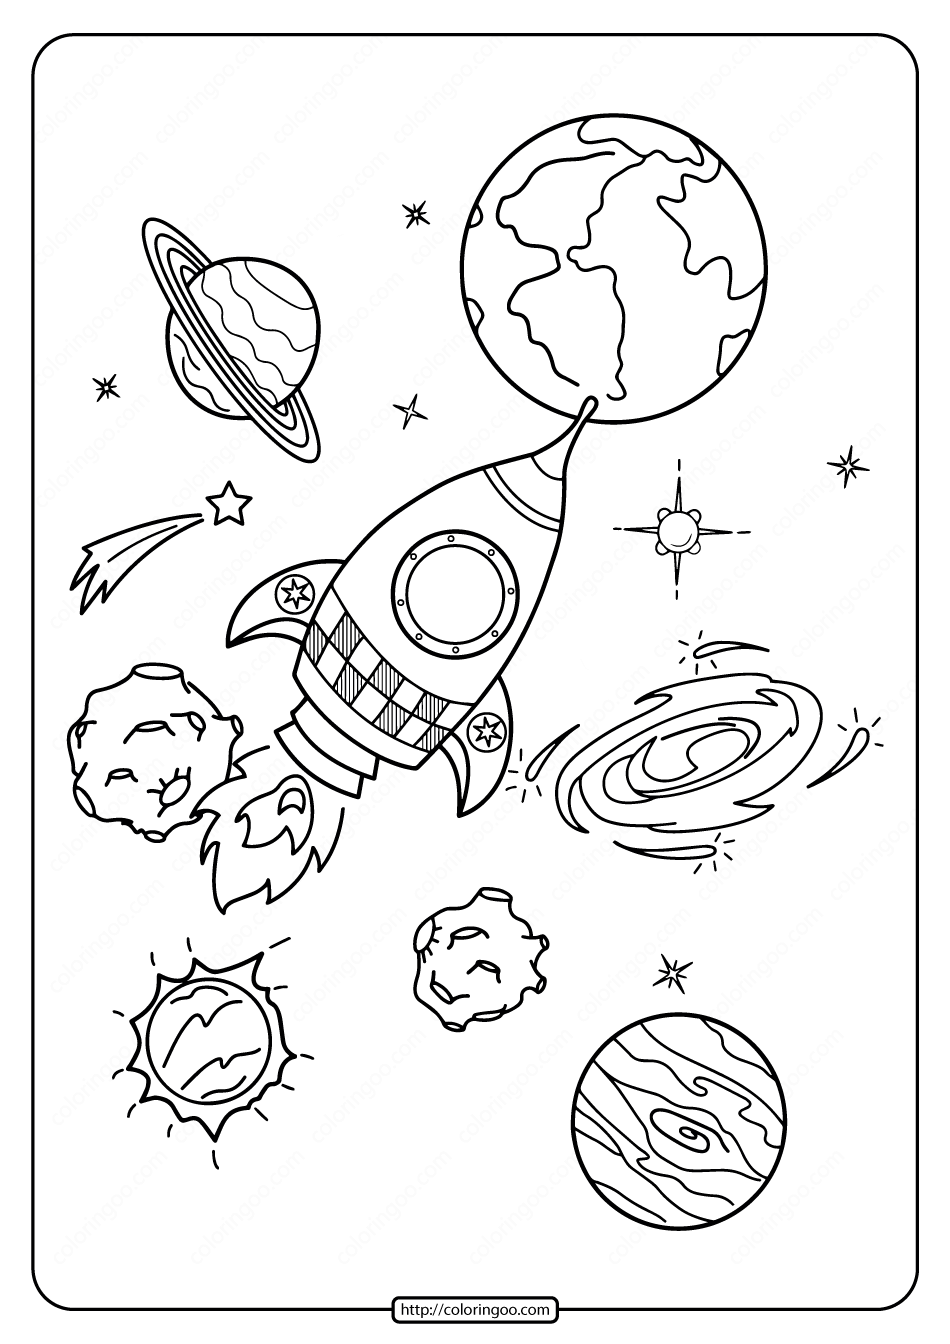 printable rocket and planets coloring pages